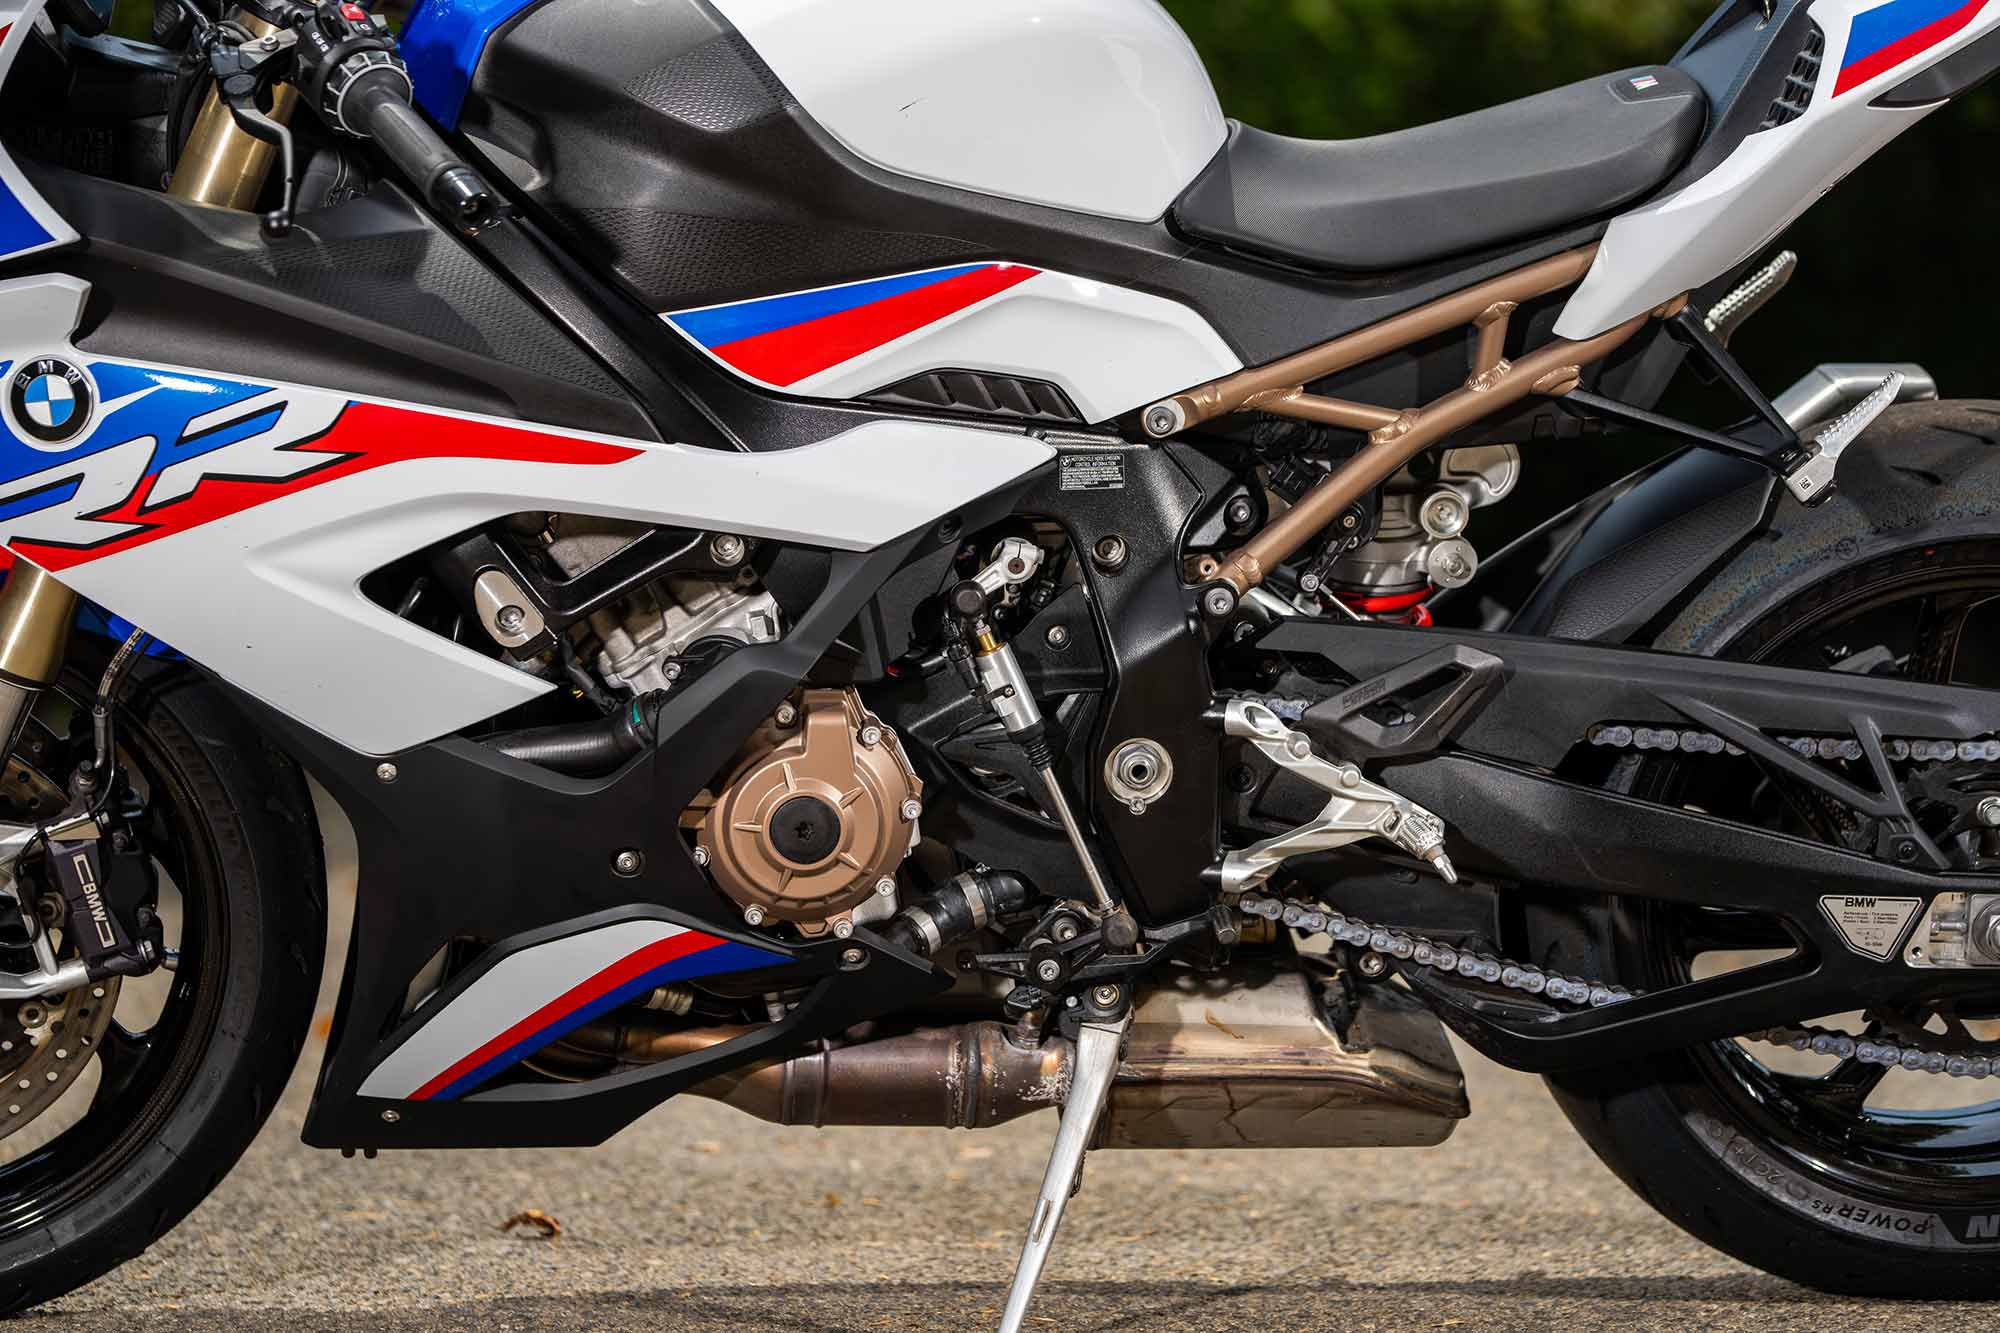 The S 1000 RR’s 999cc liquid-cooled inline-four is exhilarating and fun to ride. US-bound bikes are electronically restricted between 6,000 and 8,000 rpm due to noise and emission requirements.